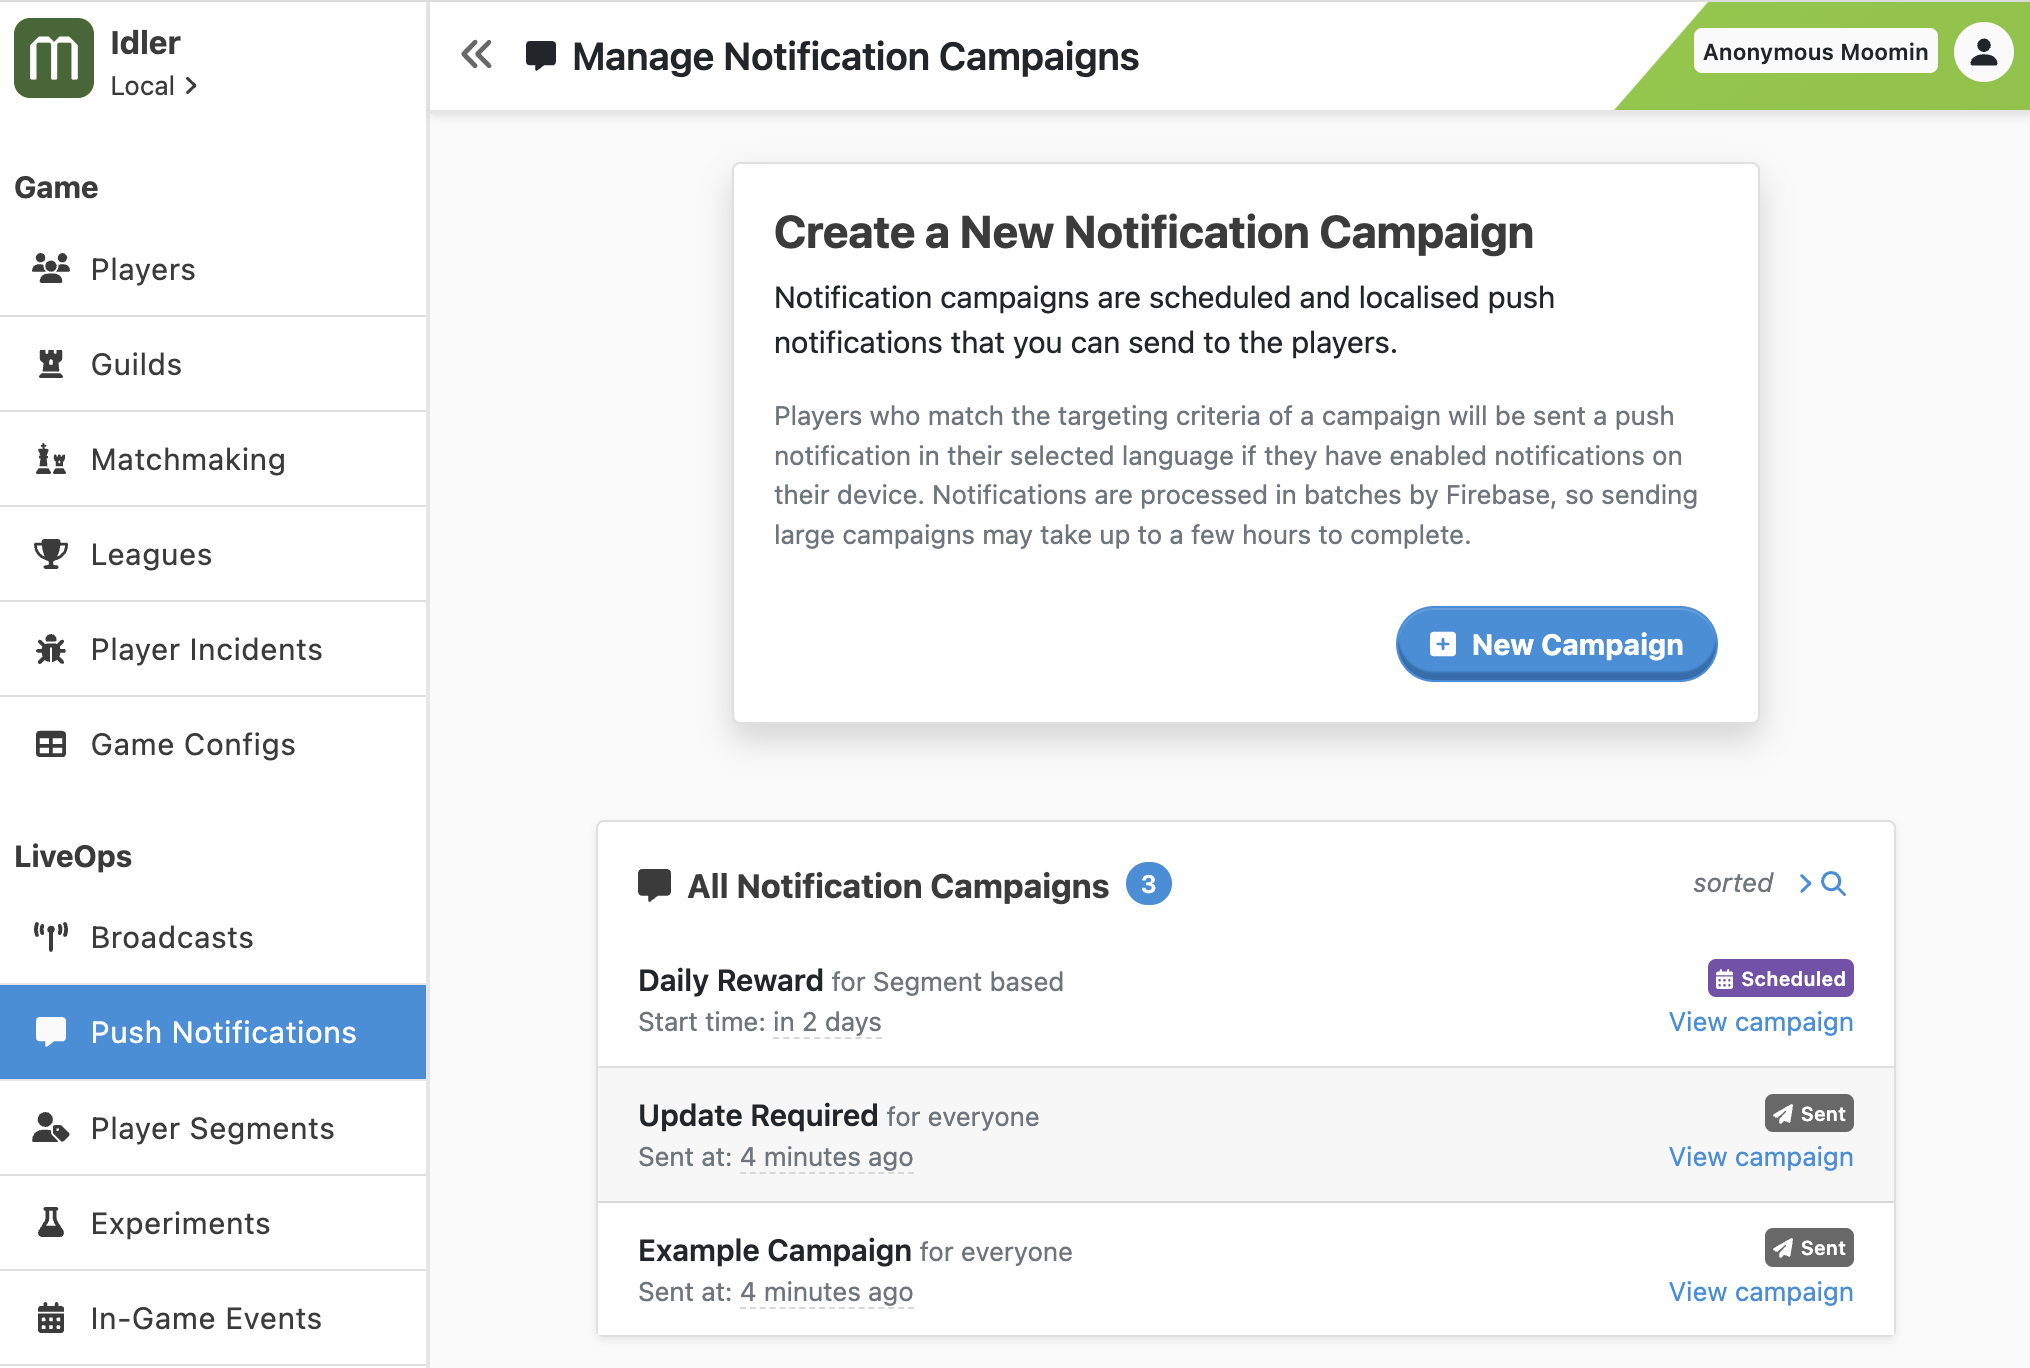 Let's navigate to the push notification tab and create a new campaign.